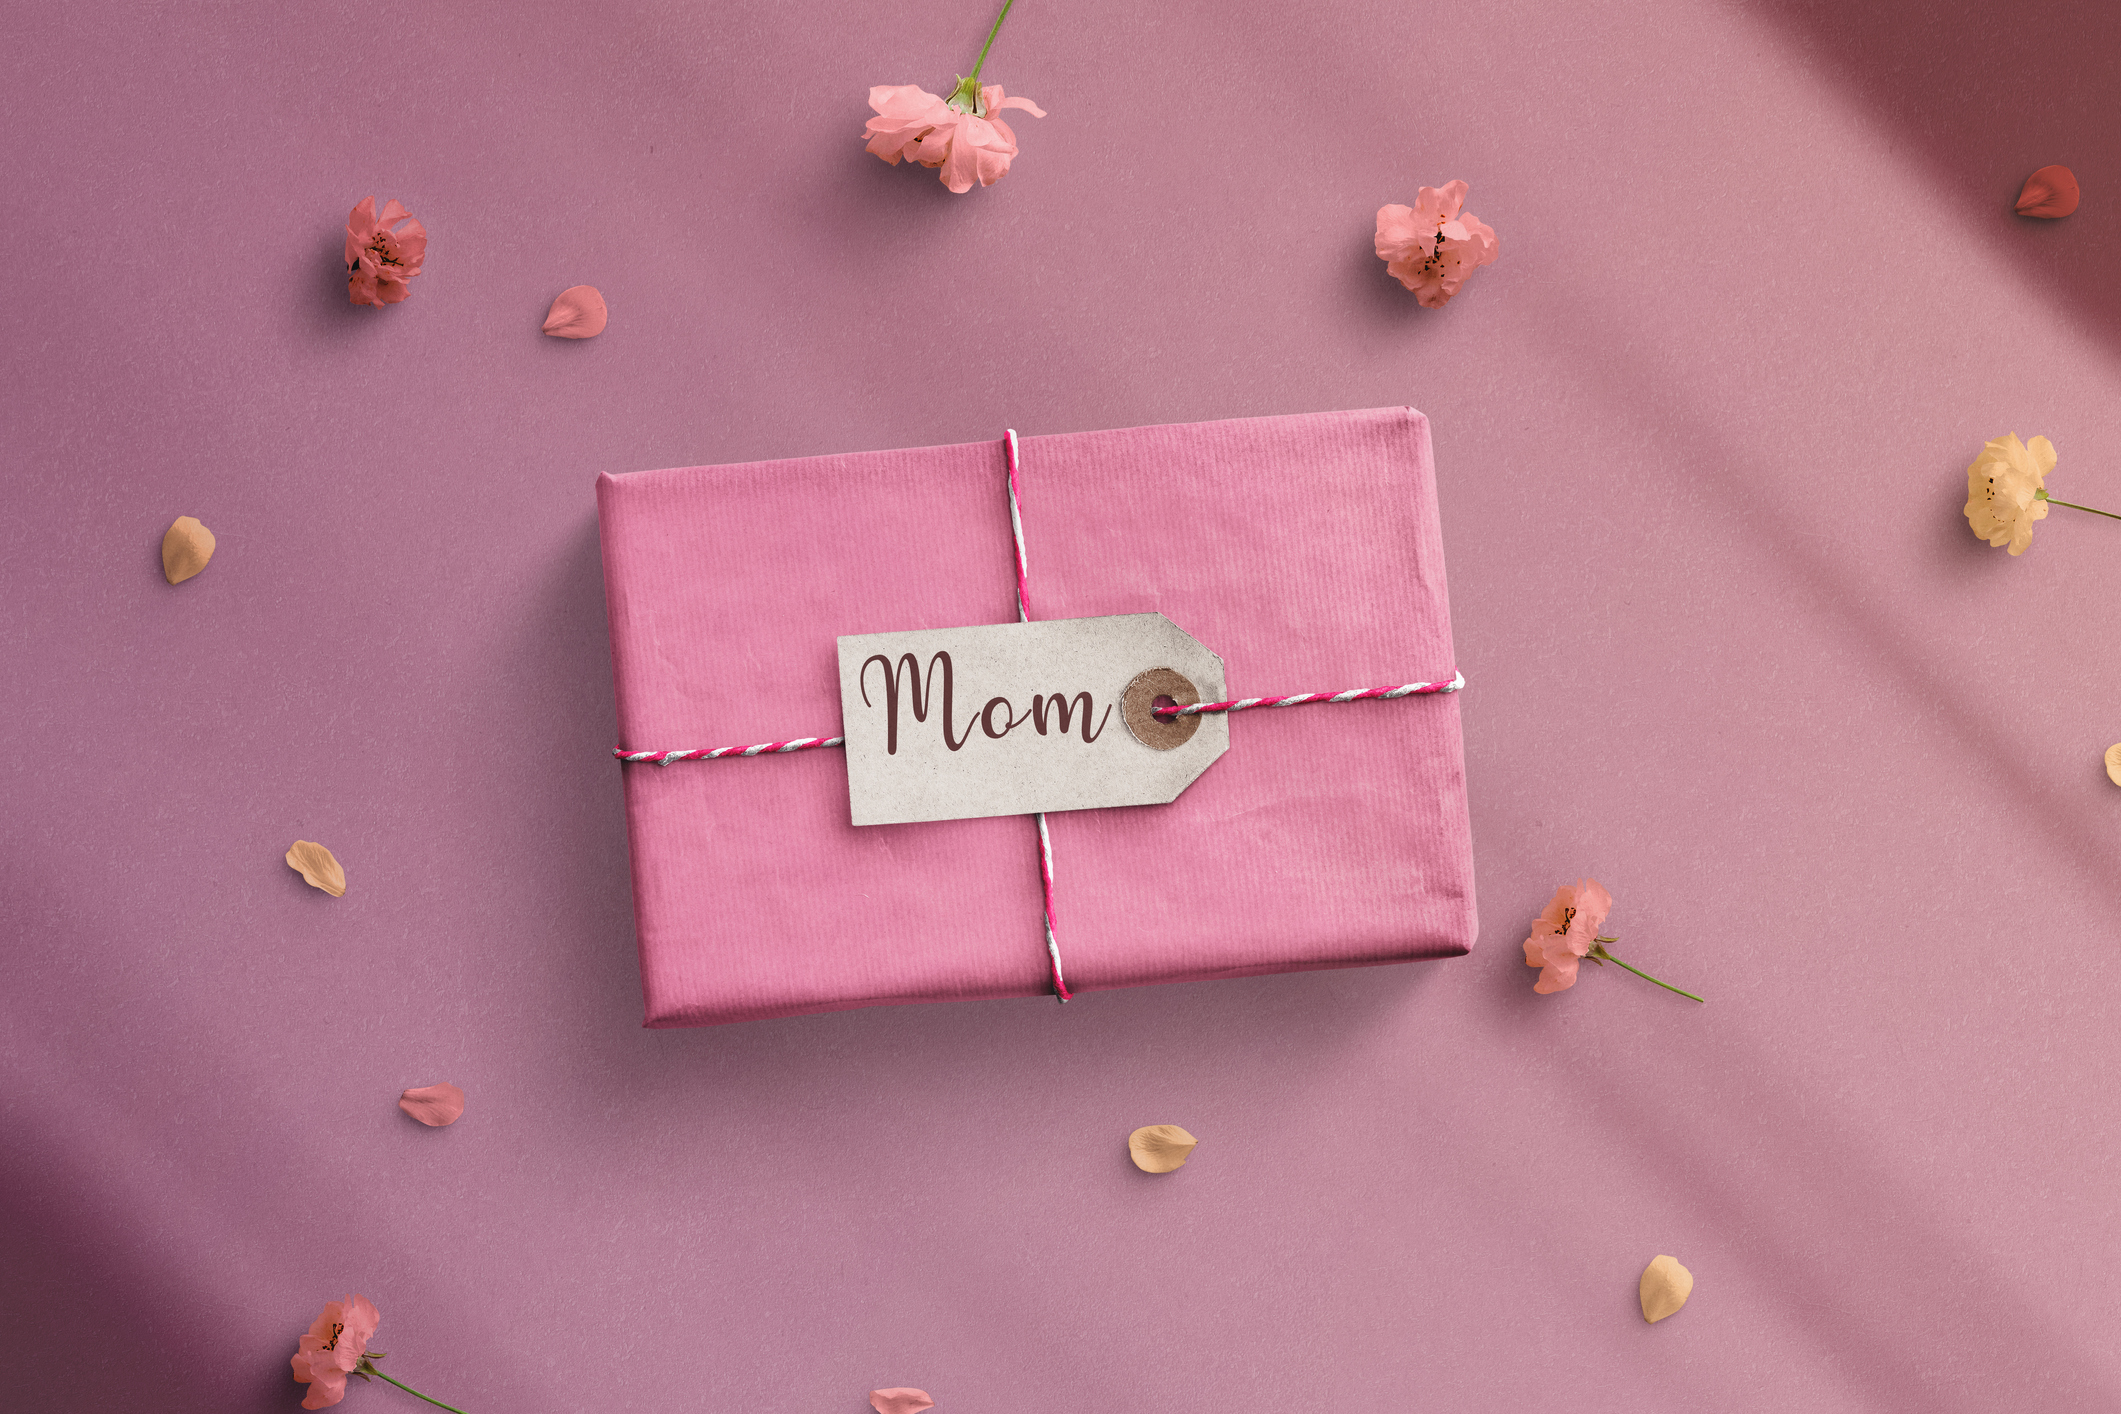 Opt Out Of Mother’s Day: New Corporate Trend ‘Reeks Of Anti-Family’ Activism, Critics Say